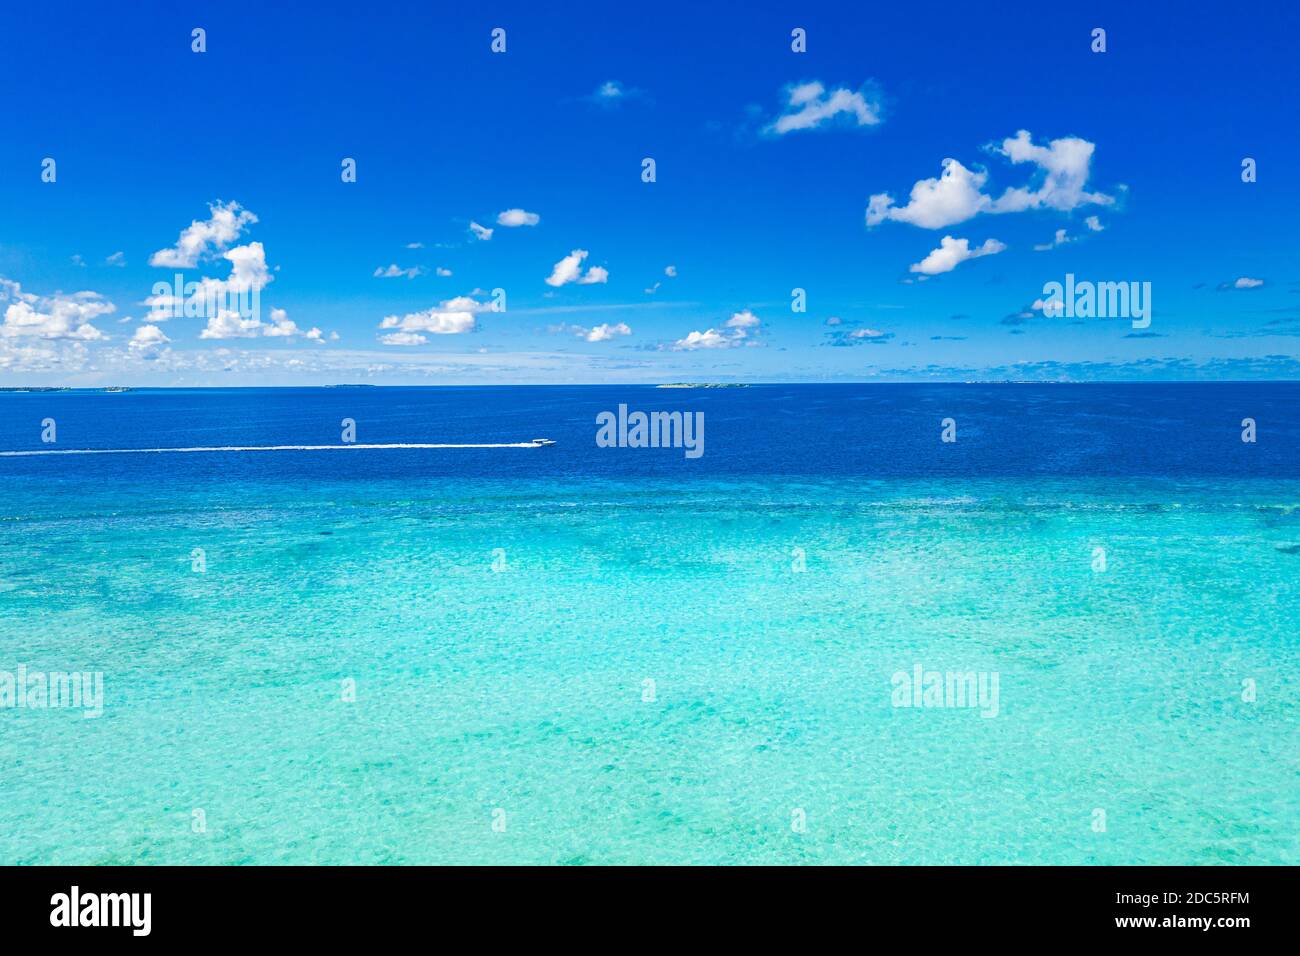 Amazing seascape, beautiful turquoise tropical ocean water with boat on it top view aerial photo. Maldives Indian ocean, aerial seascape, landscape Stock Photo